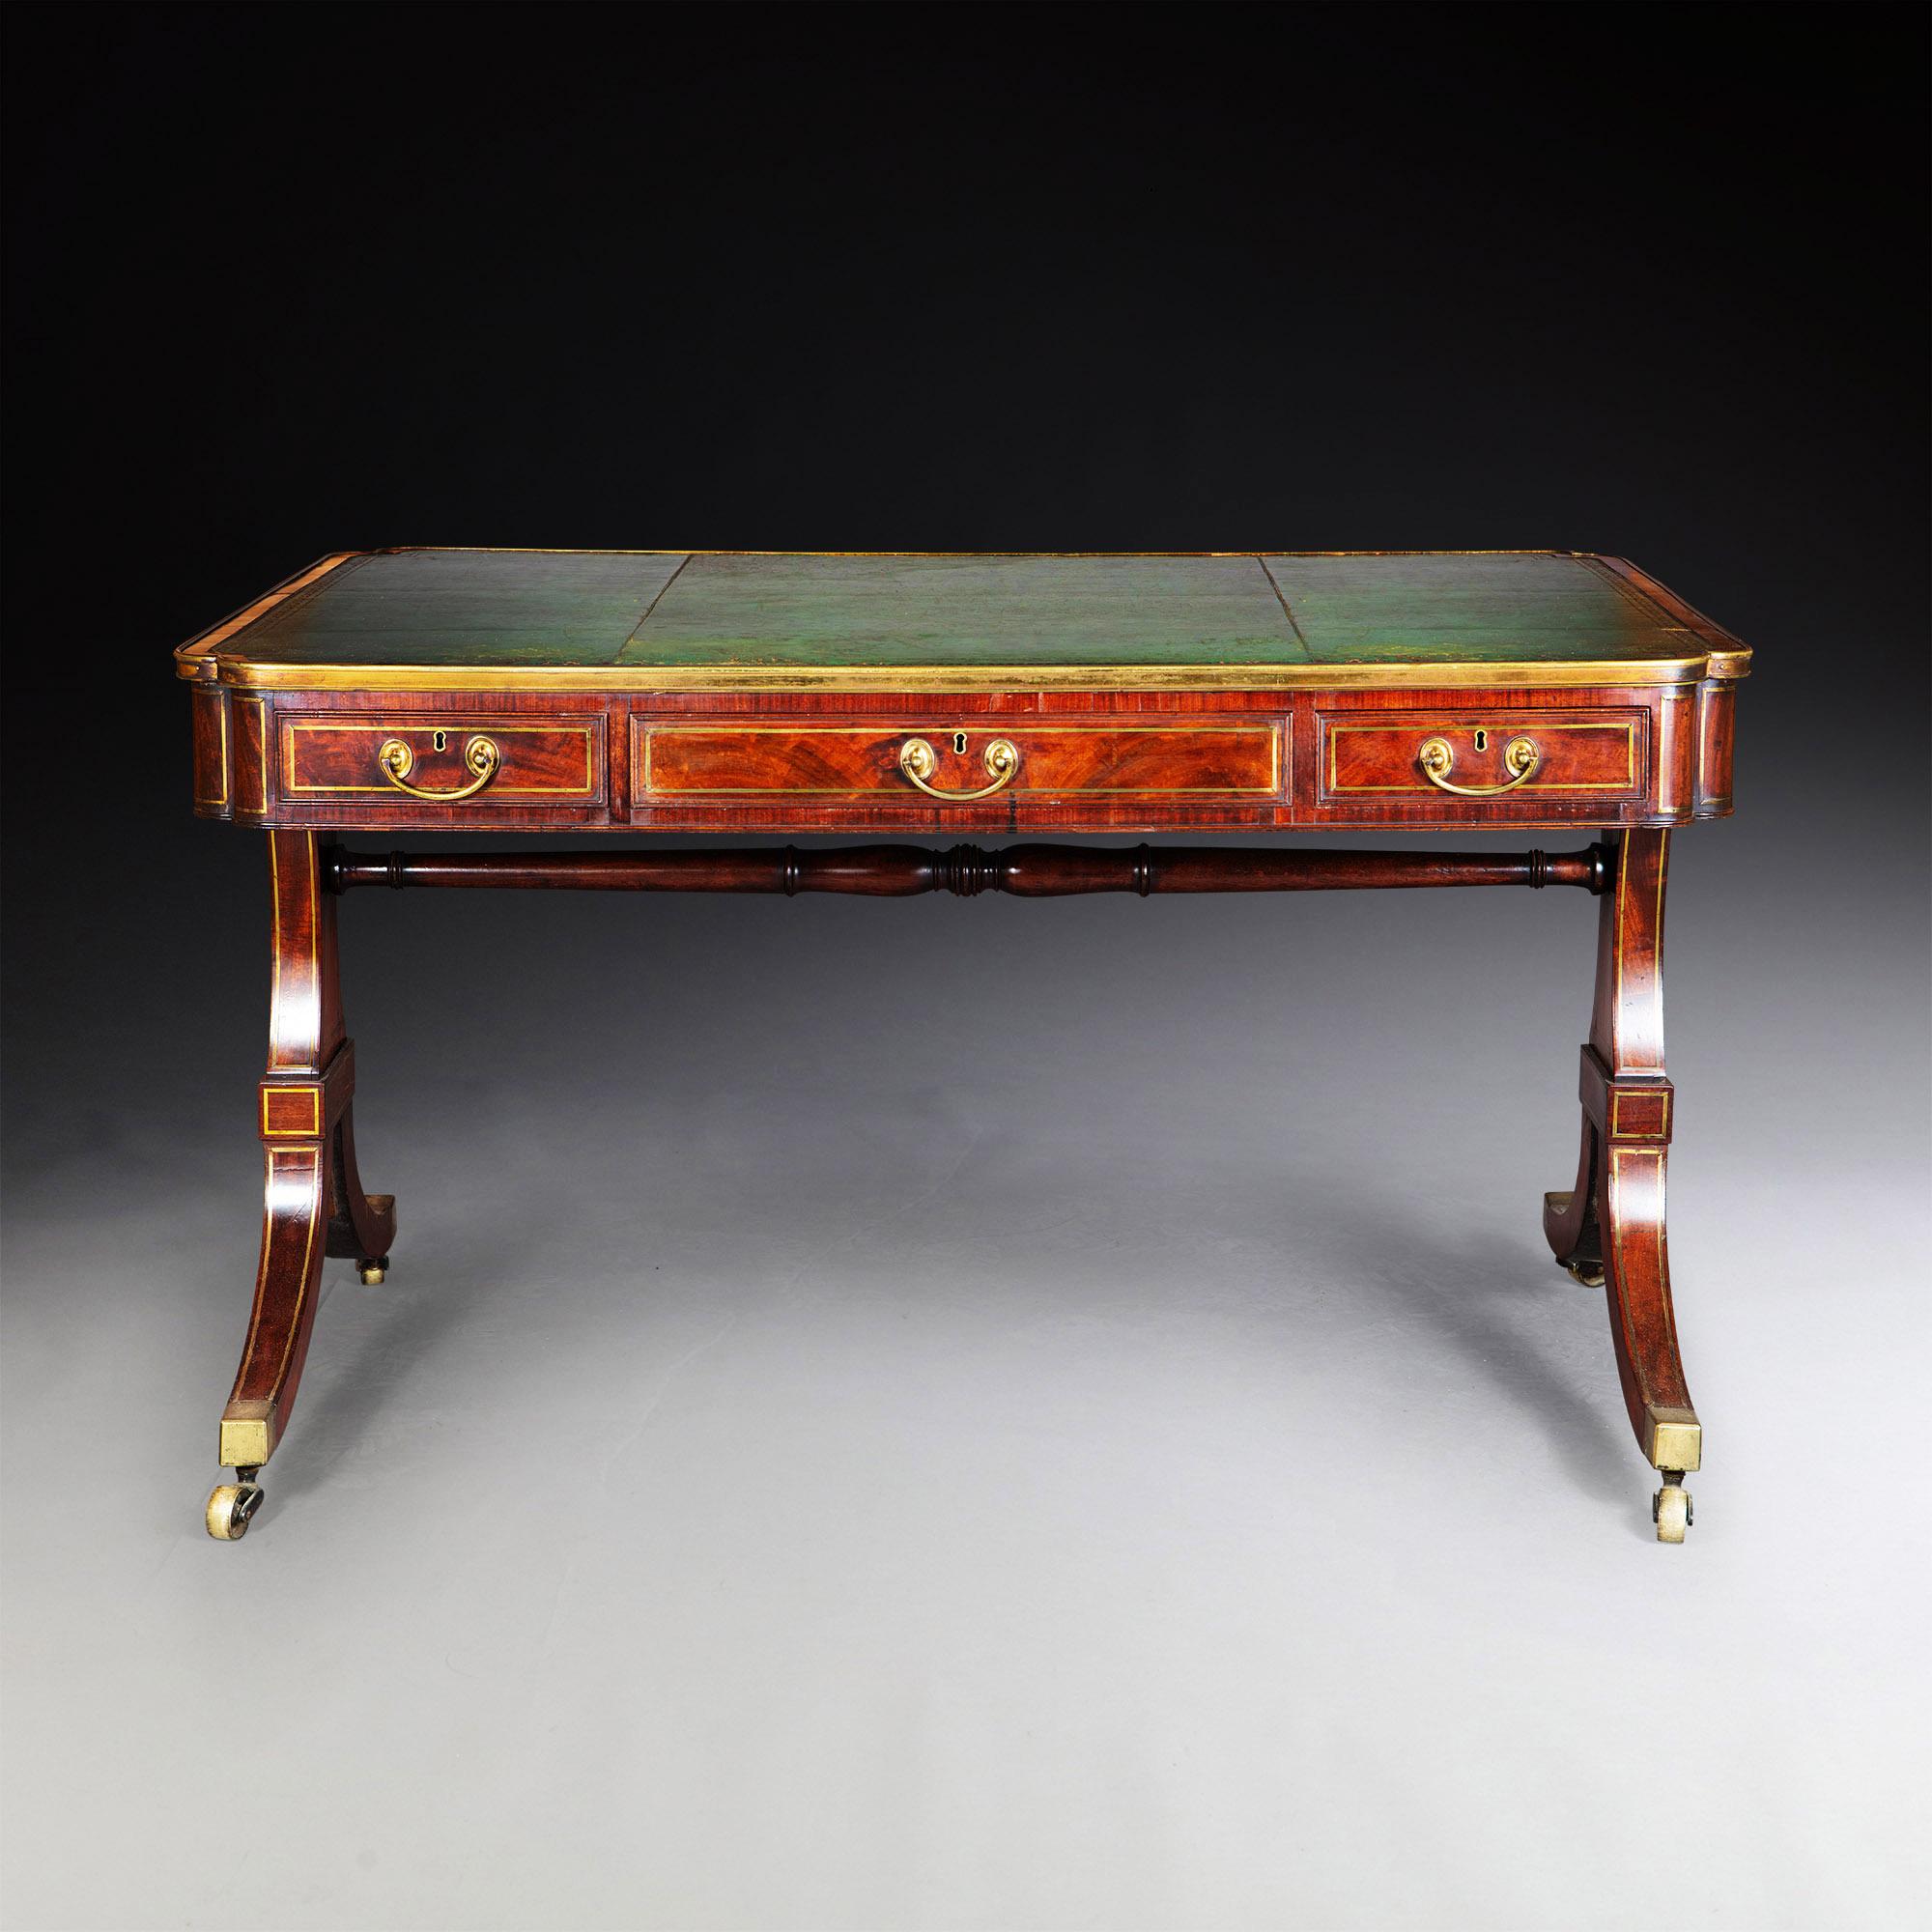 A fine George IV figured mahogany writing table
The tooled leather top inside a mahogany band, with a double brass rimed edge, above a frieze with two brass rimmed drawers. Features panel sides in figured mahogany, resting on solid brass inlaid